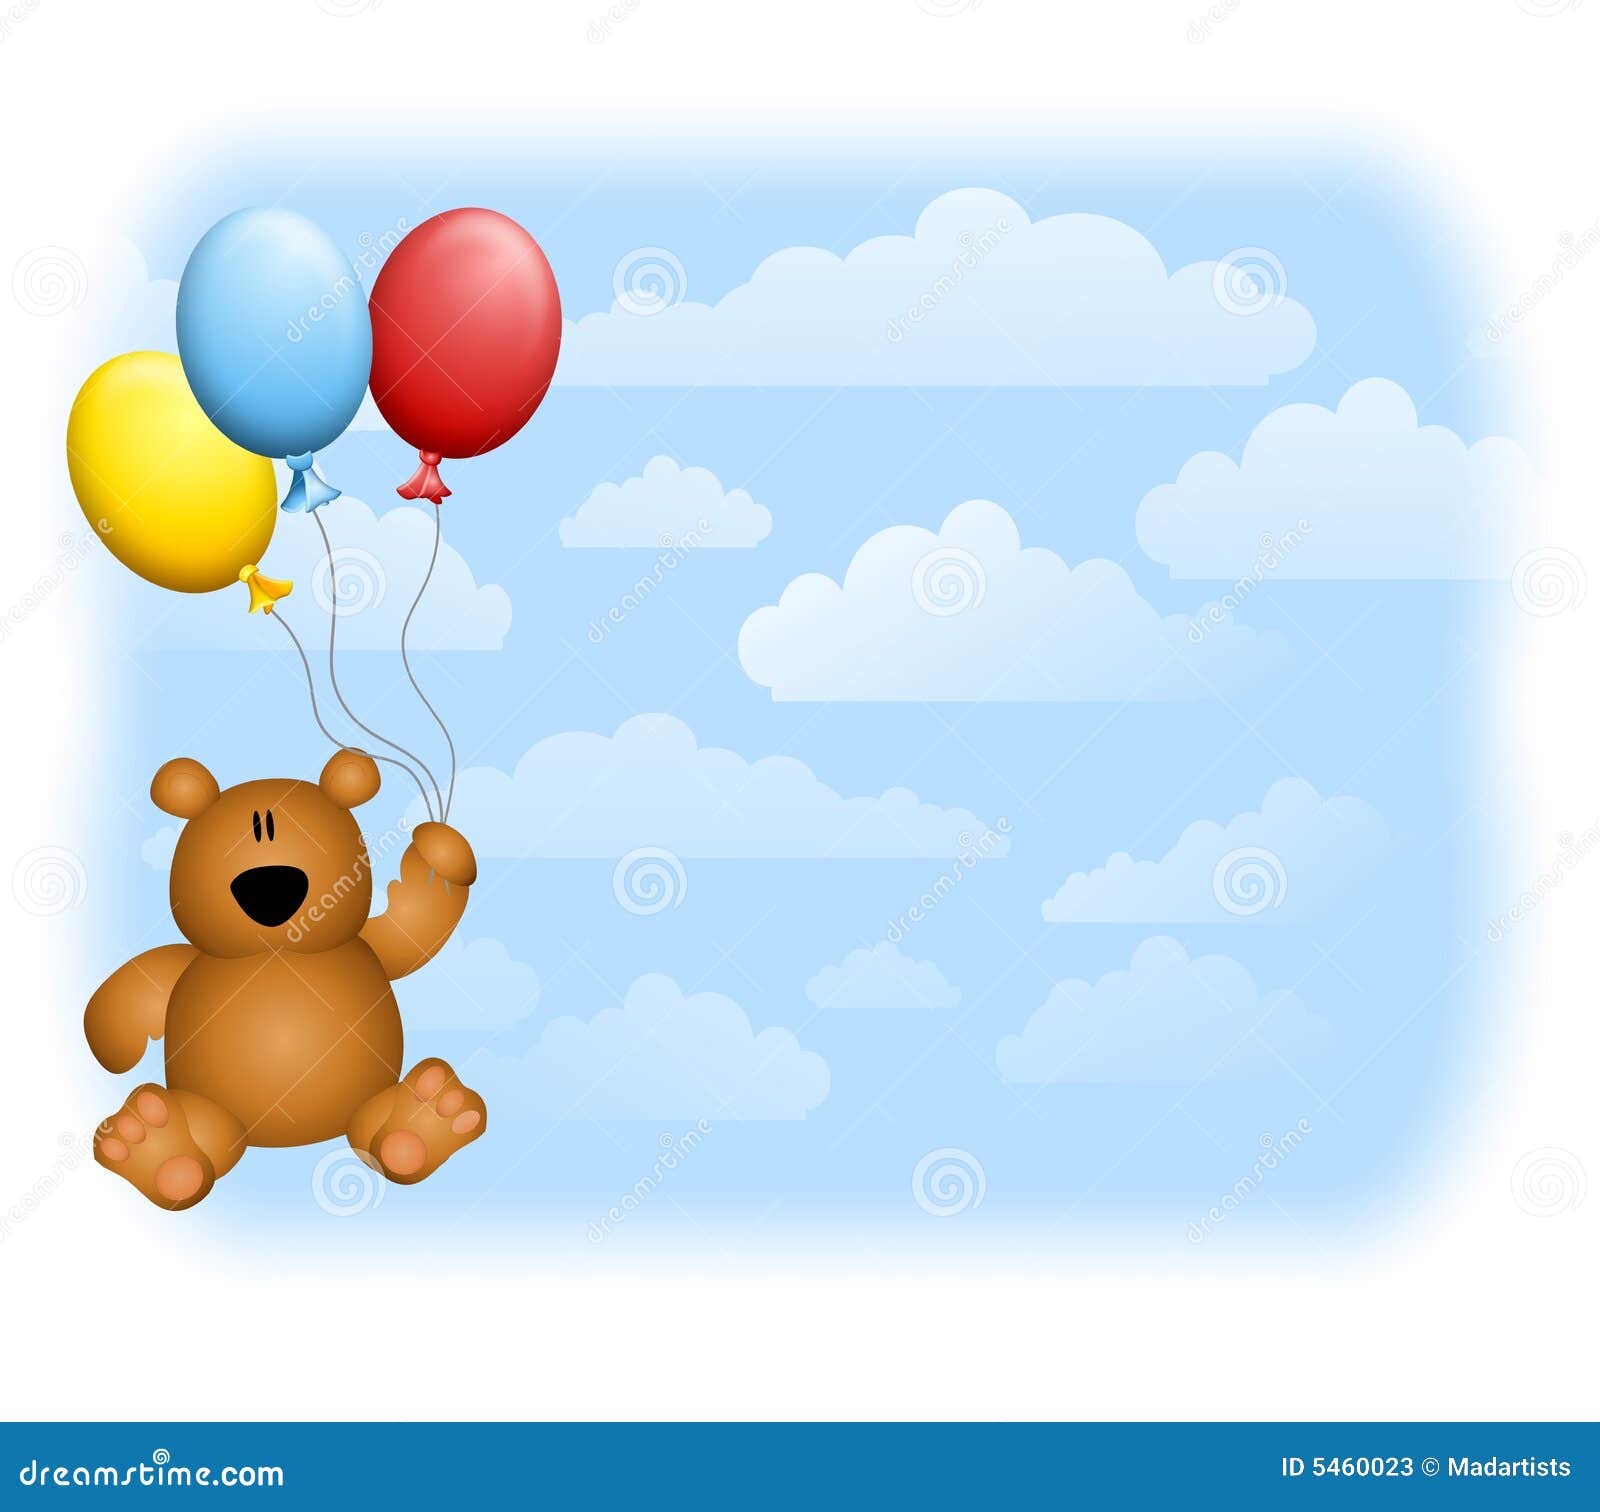 teddy bear with balloons free clipart - photo #45